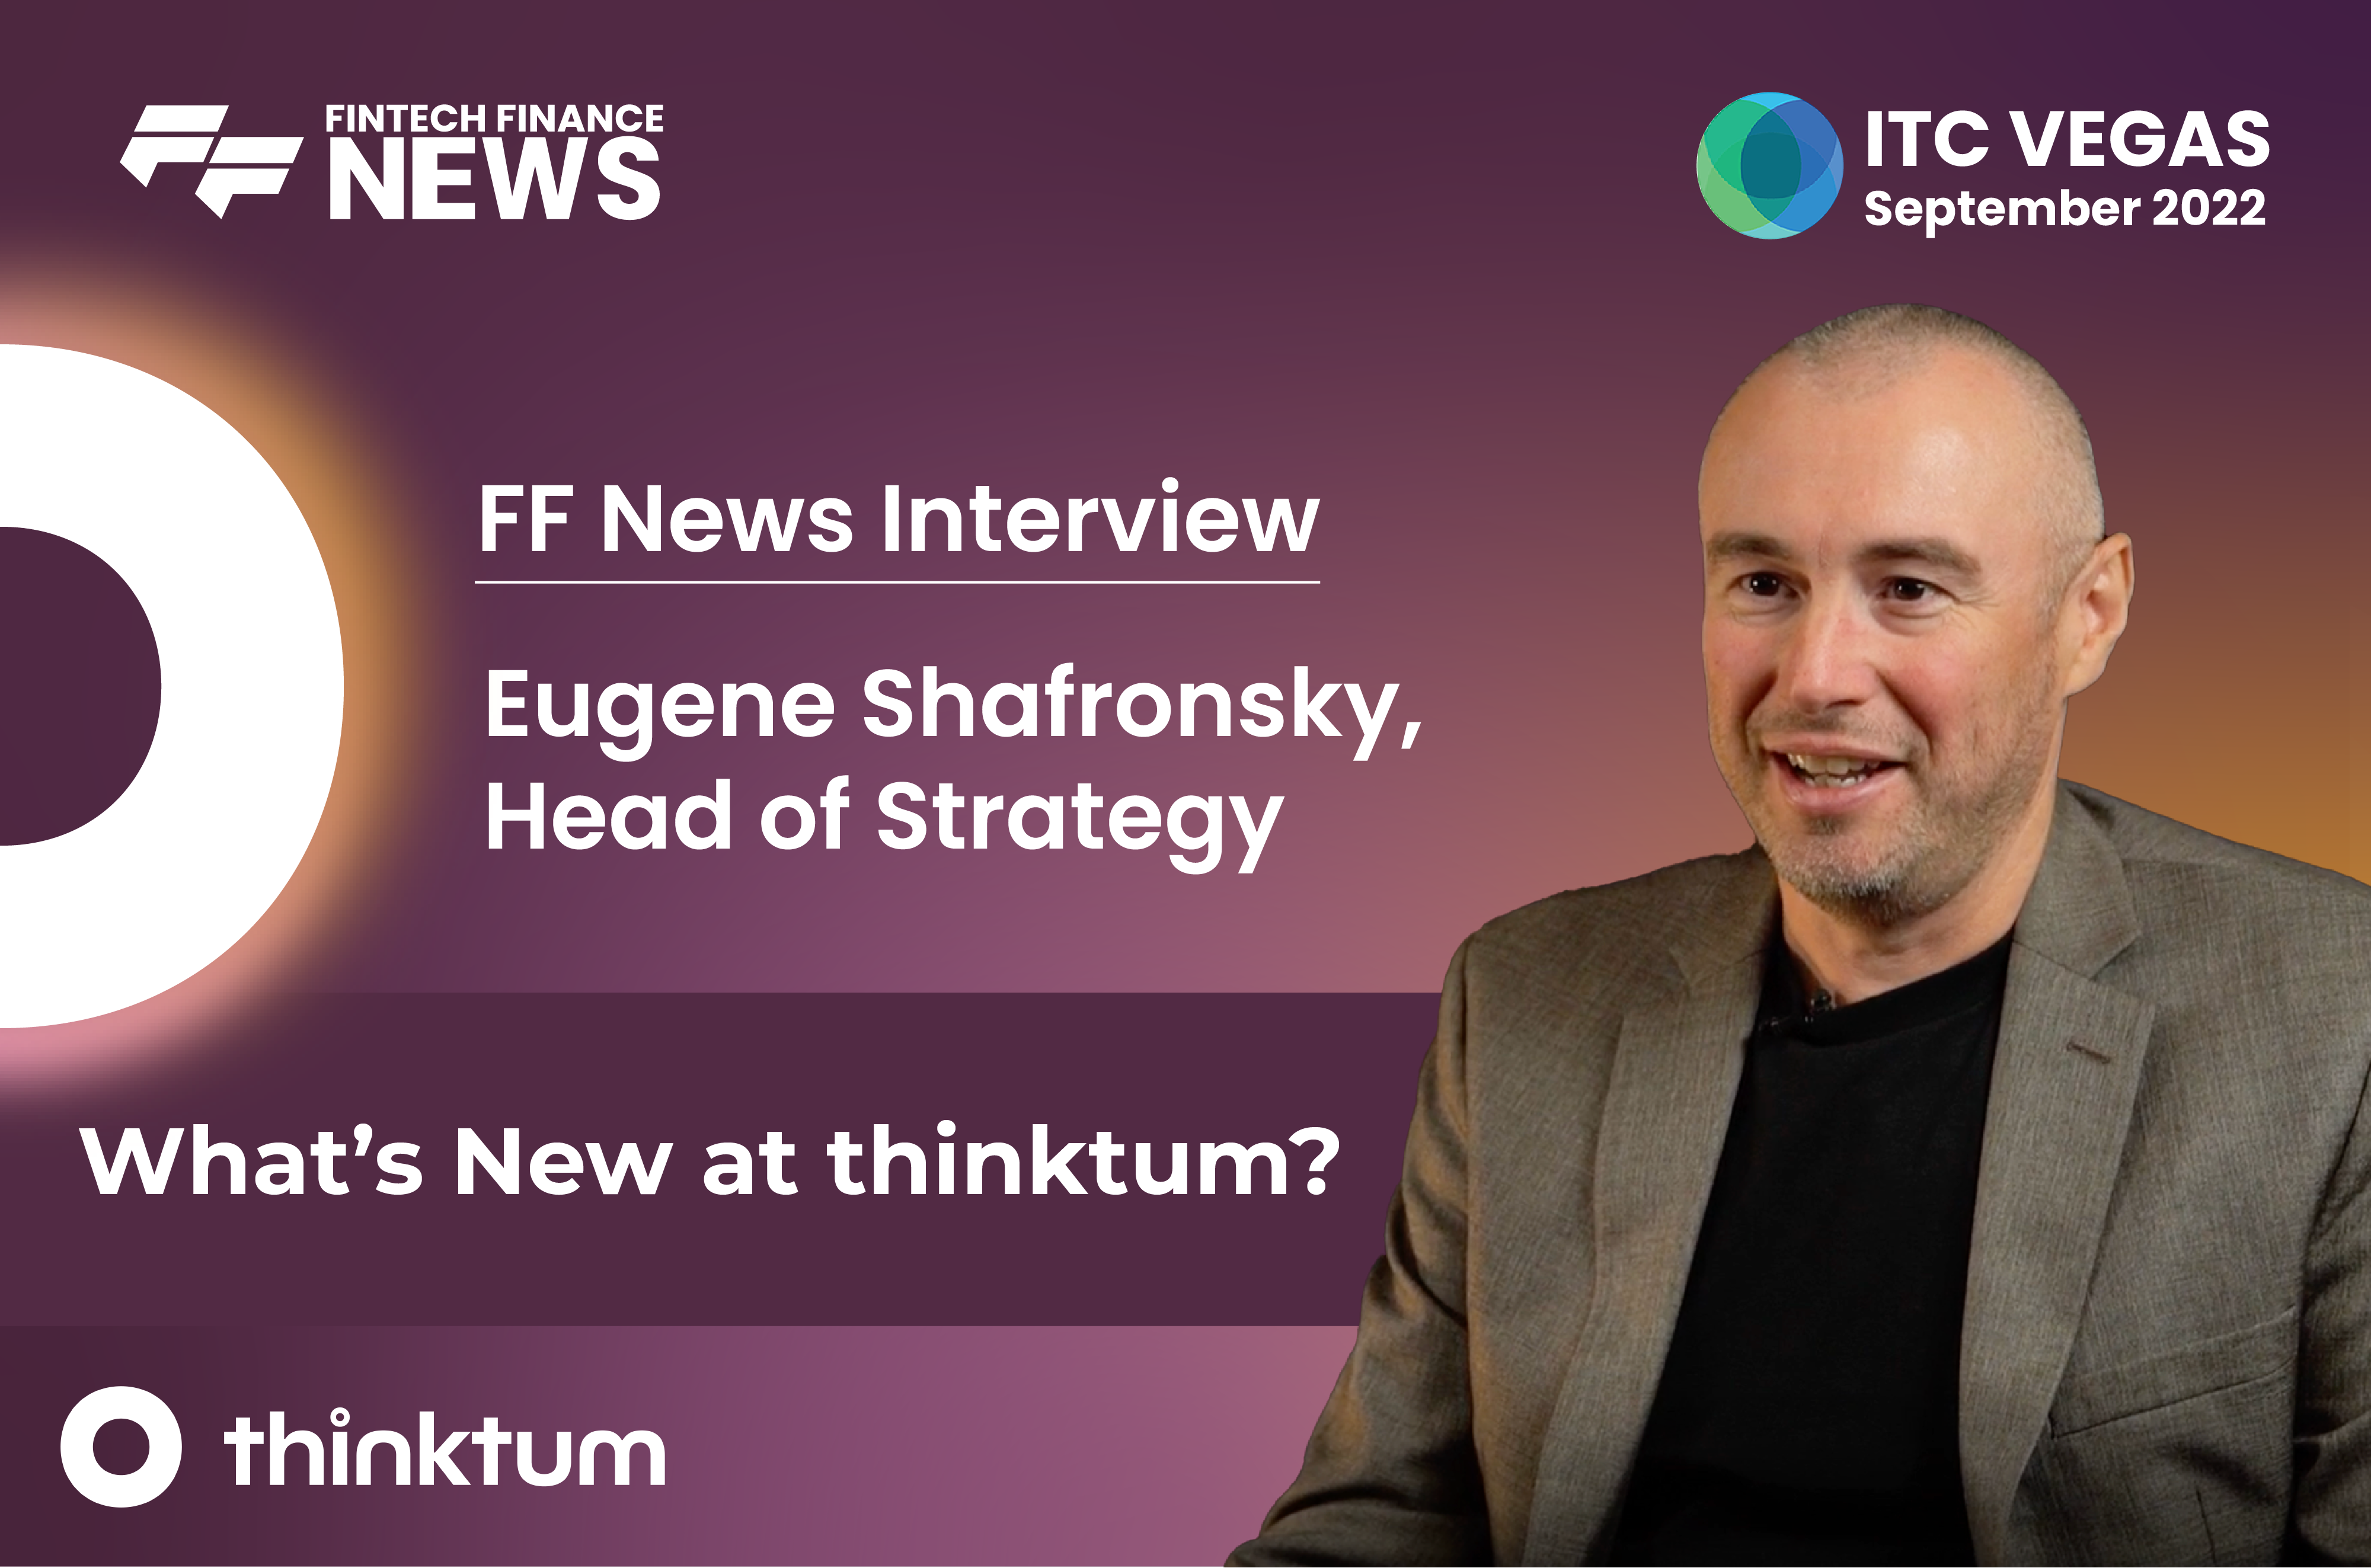 Interview ad with thinktum's Eugene Shafronsky Head of Strategy at thinktum, with the FF News, thinktum and ITC Vegas 2022 logo.